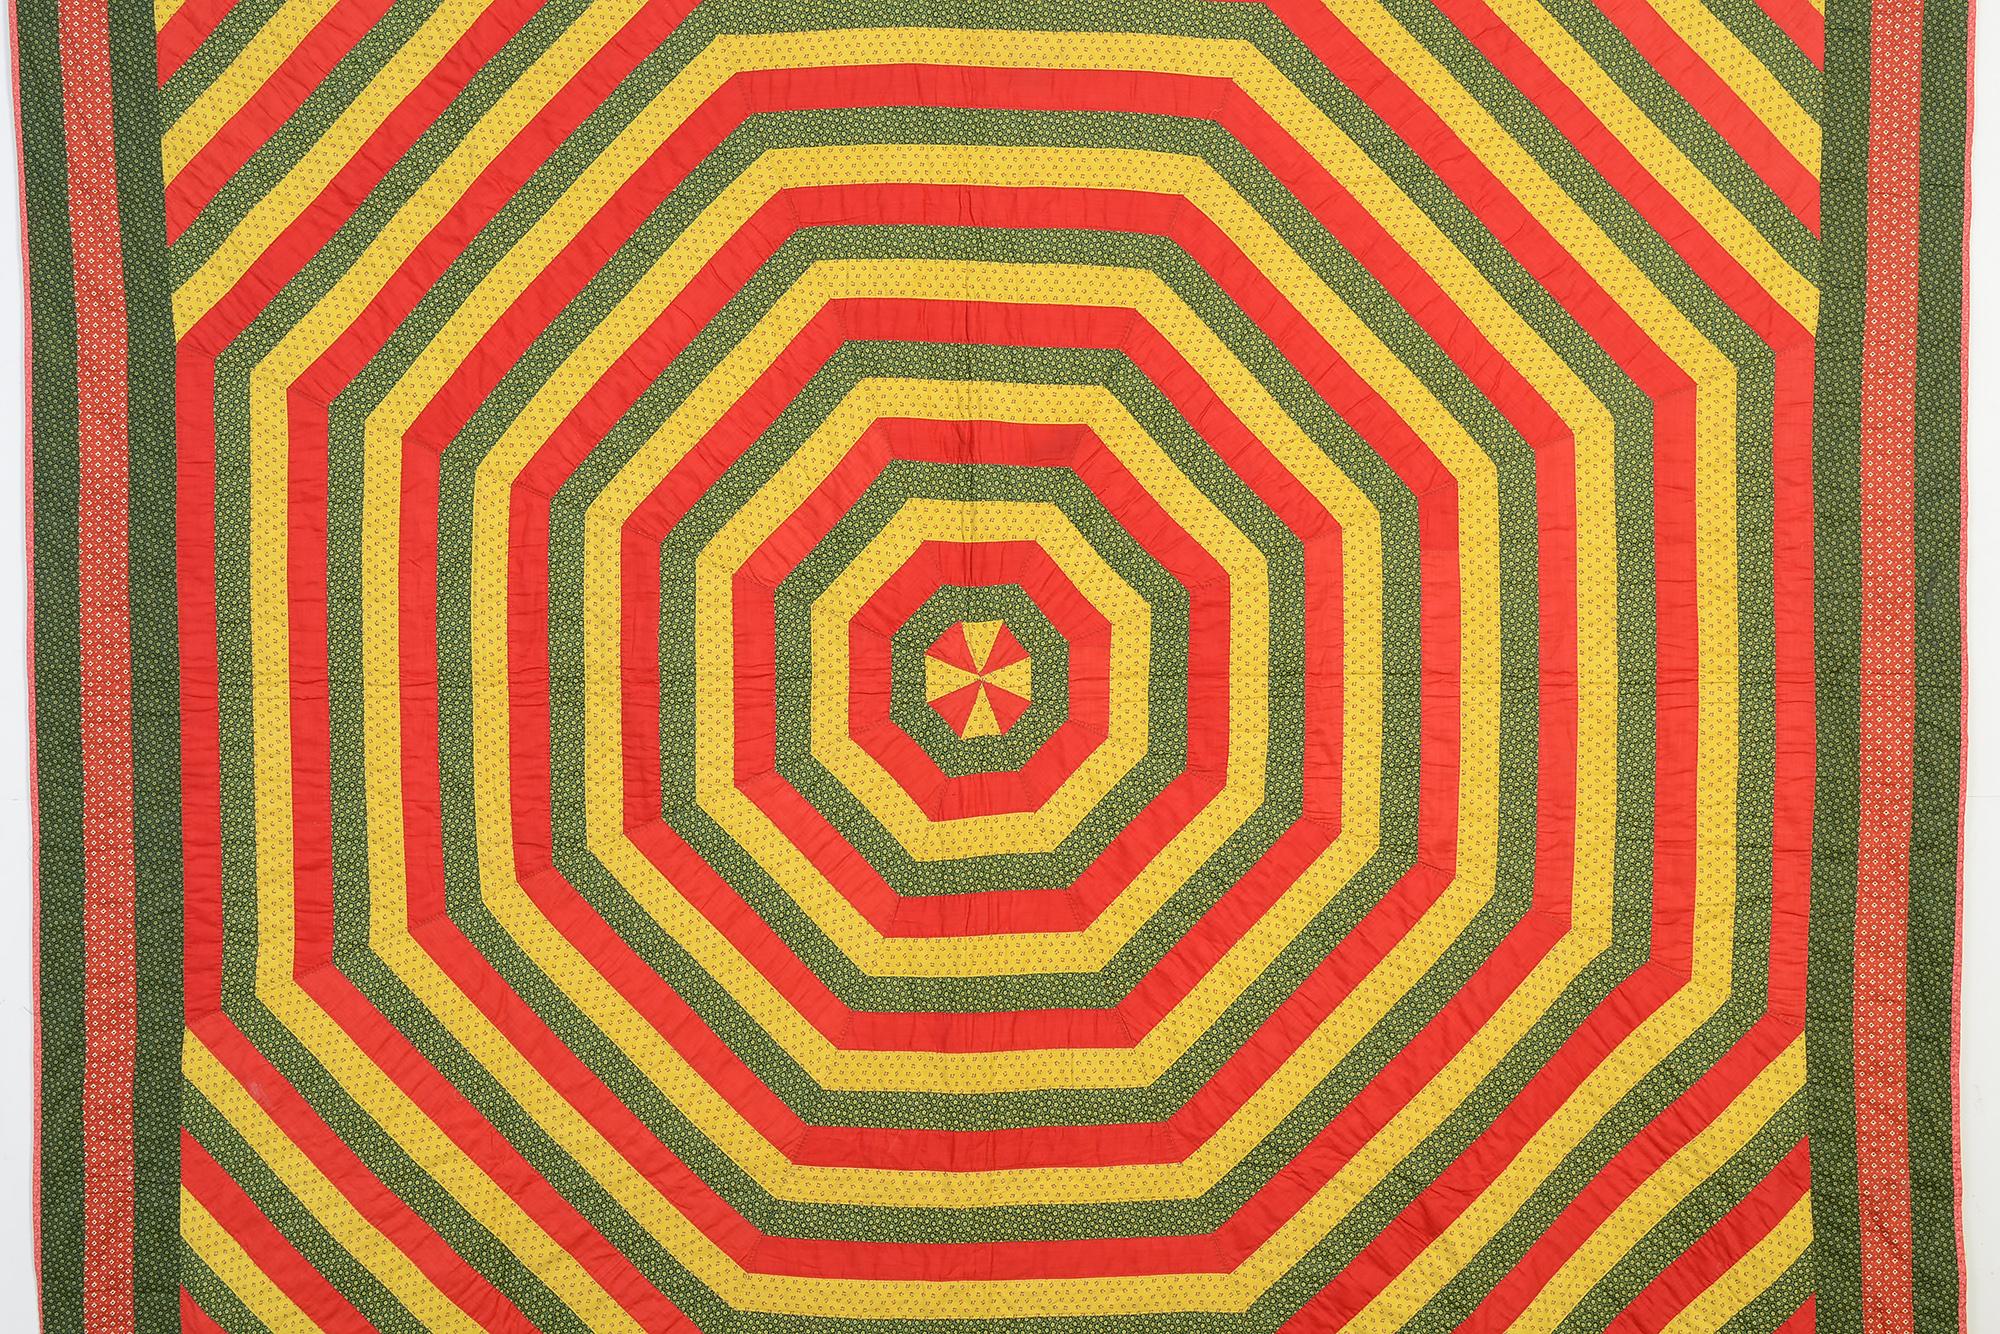 This stunning quilt of Concentric Octagons is a real eye dazzler. The Pinwheel center draws the eye to the heart of the bullseye. The fabrics are all prints with the exception of the solid red which adds to its prominence. The quilt is from the